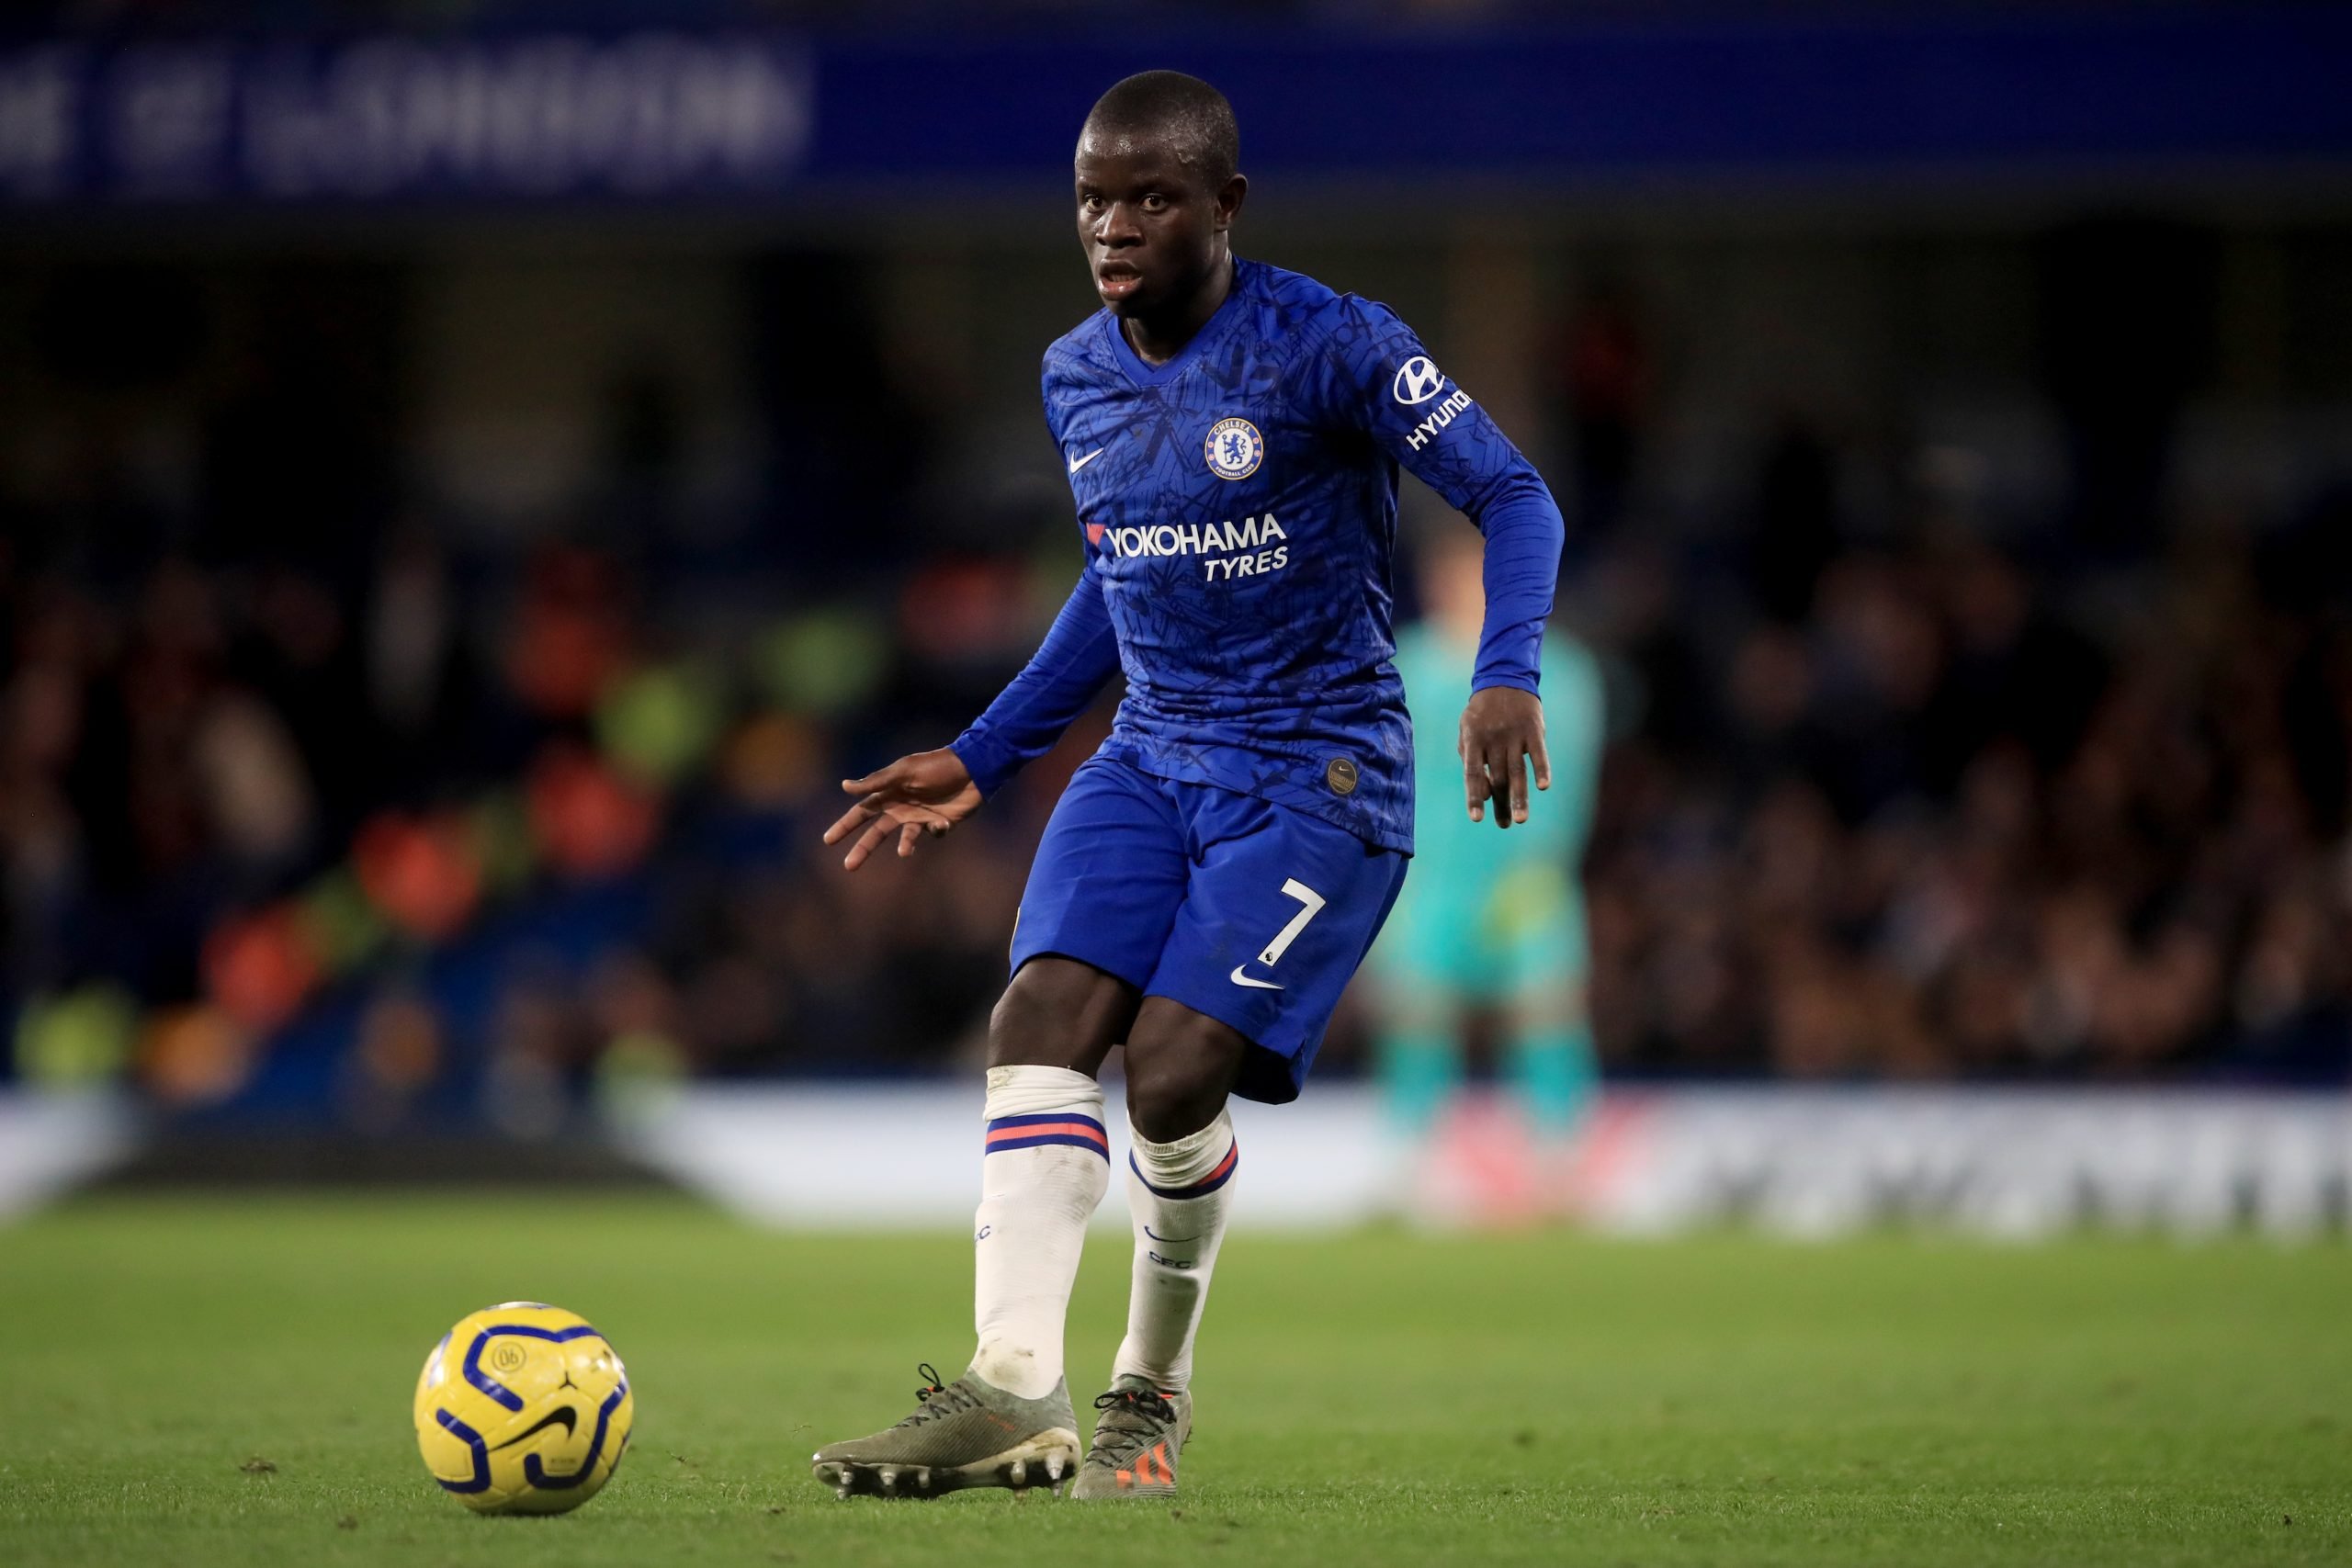 N’Golo Kante To Miss Remainder Of The Season - Kante in action during a match